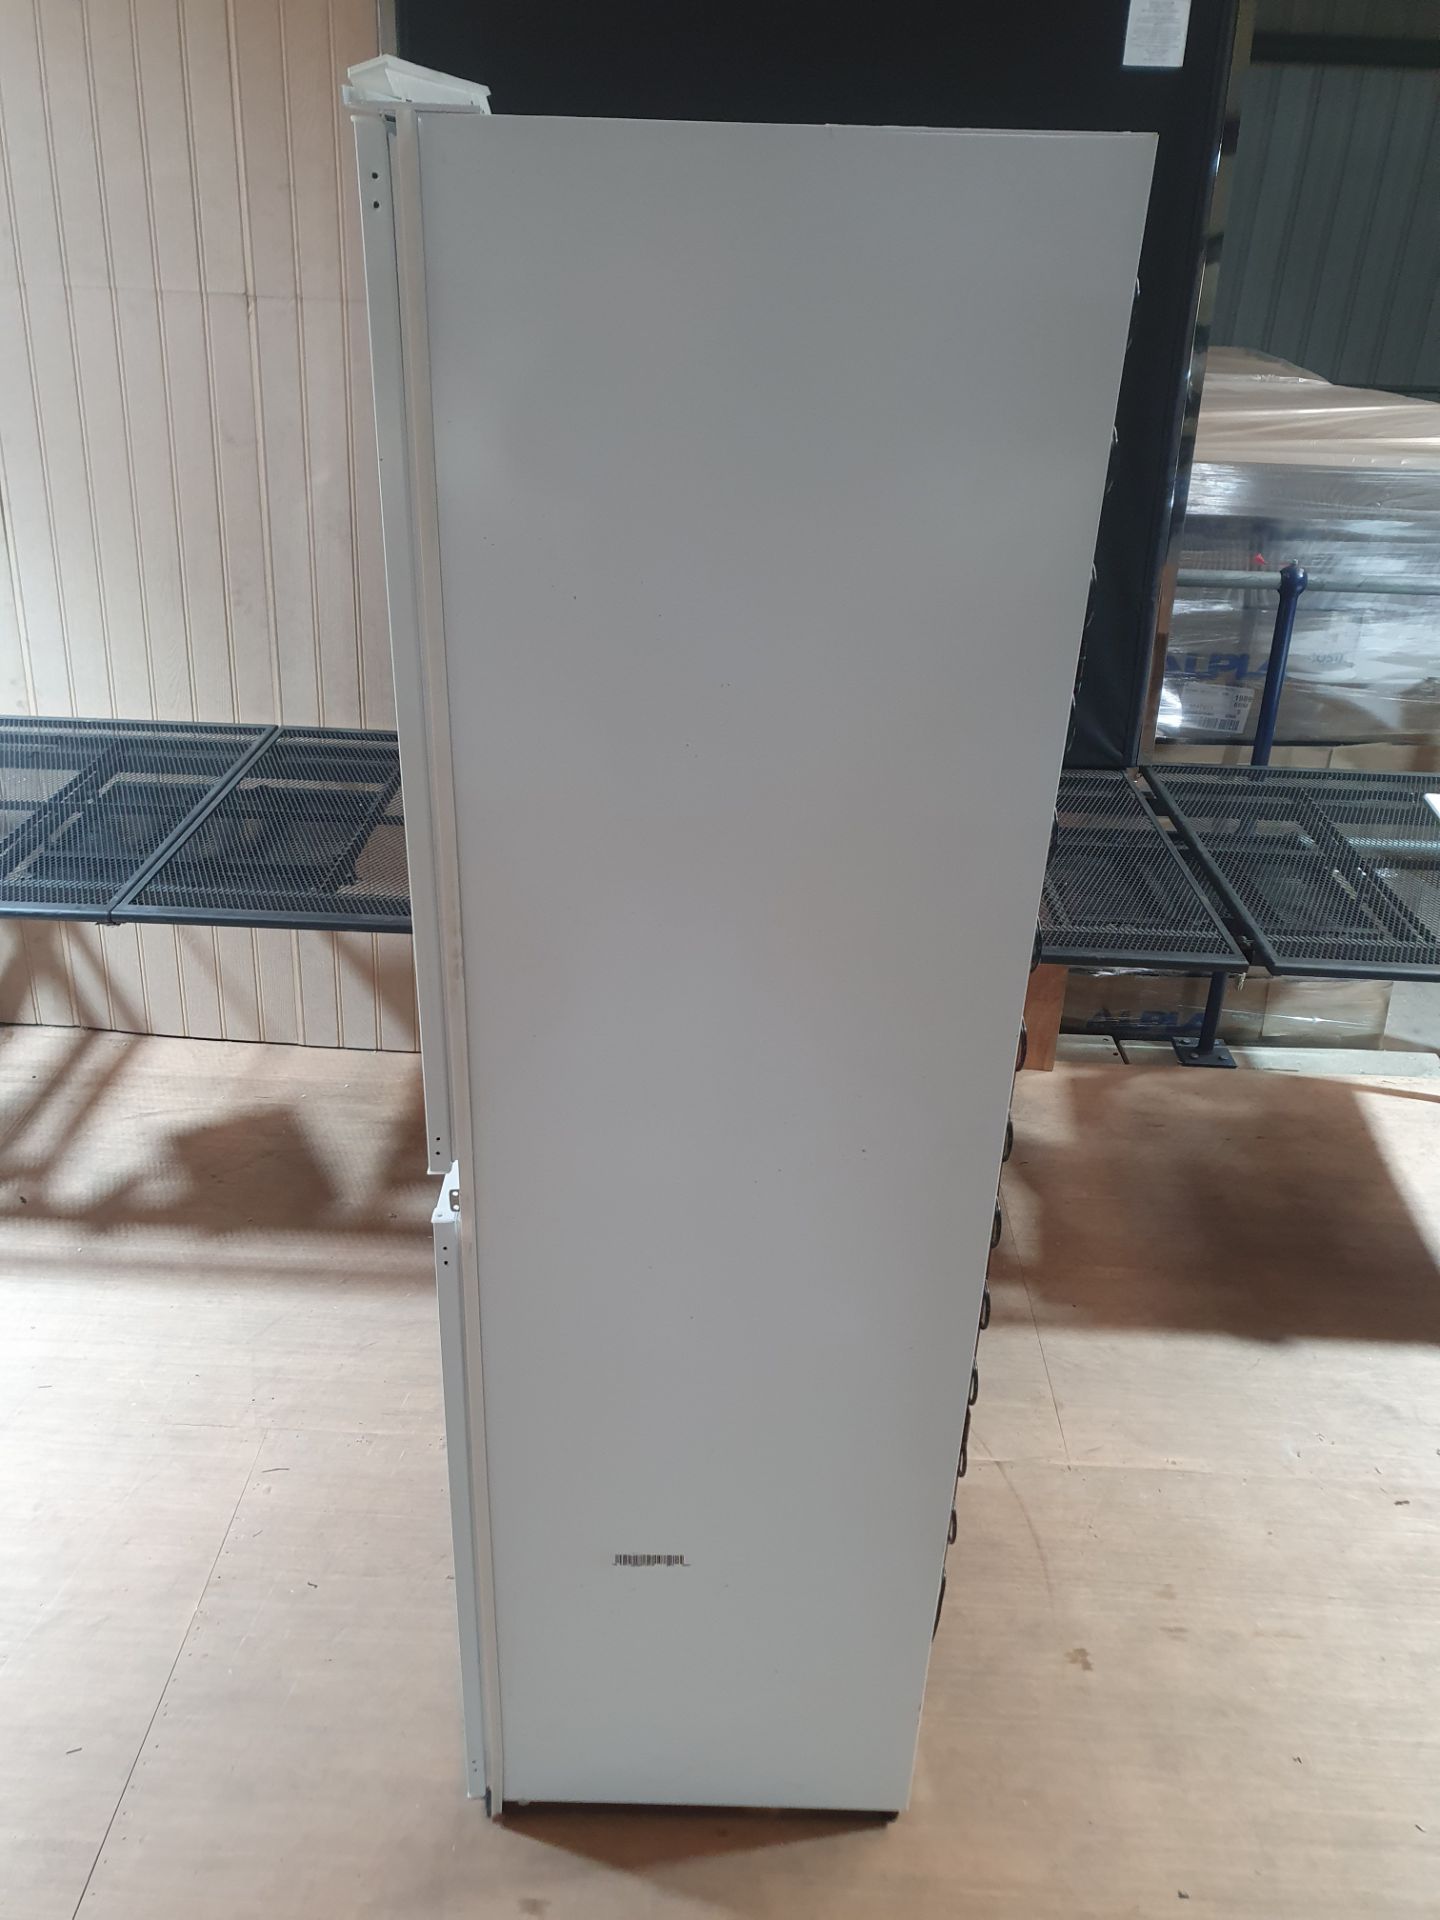 Current Online Price £859. Smeg Universal Built In Right Hinge Refrigerator White UKC4172F - Image 11 of 16